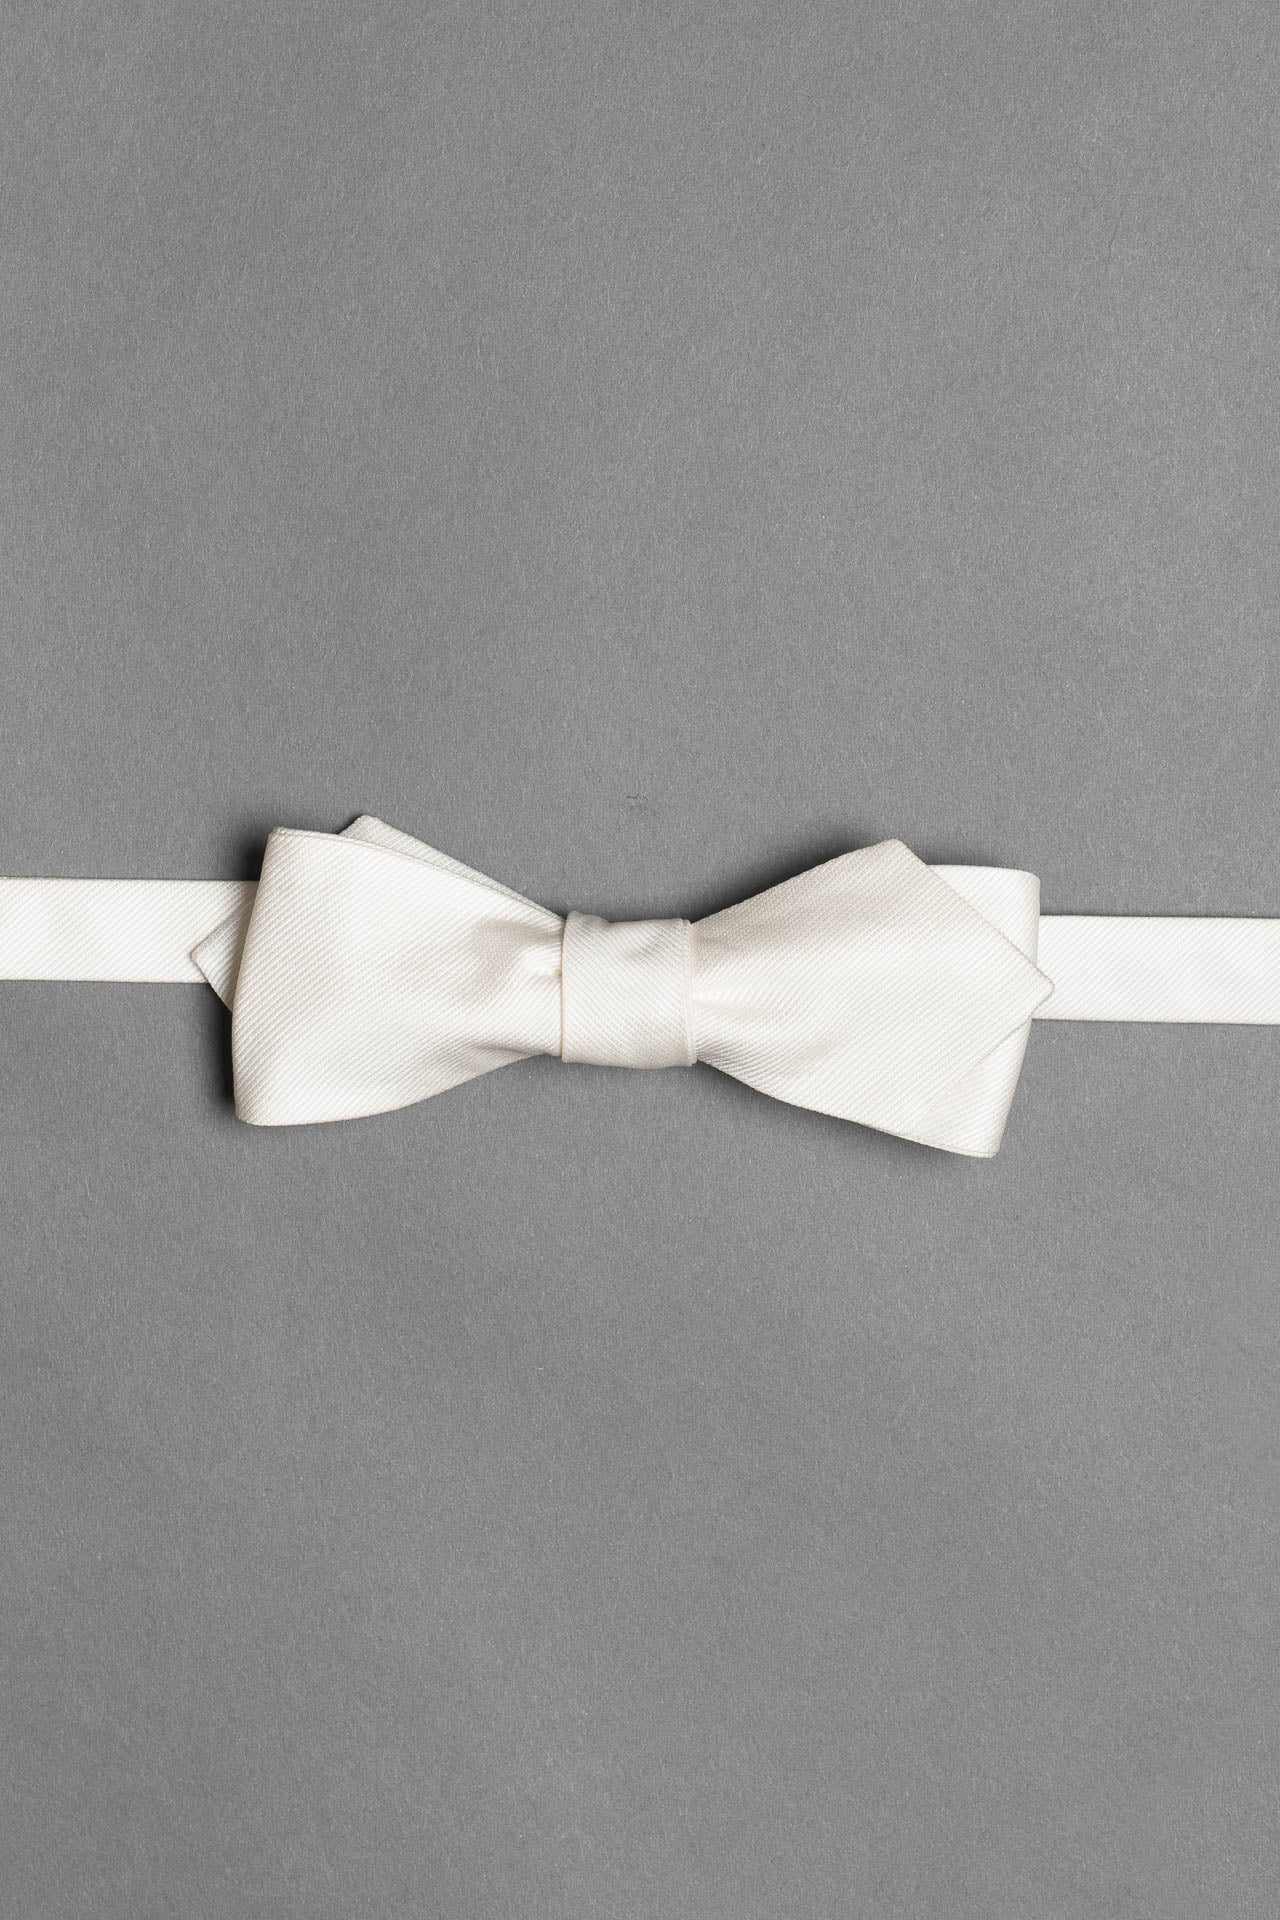 white-formal-bow-tie-tuxedo-silk-woven-self-tying-onceaday-made-in-italy